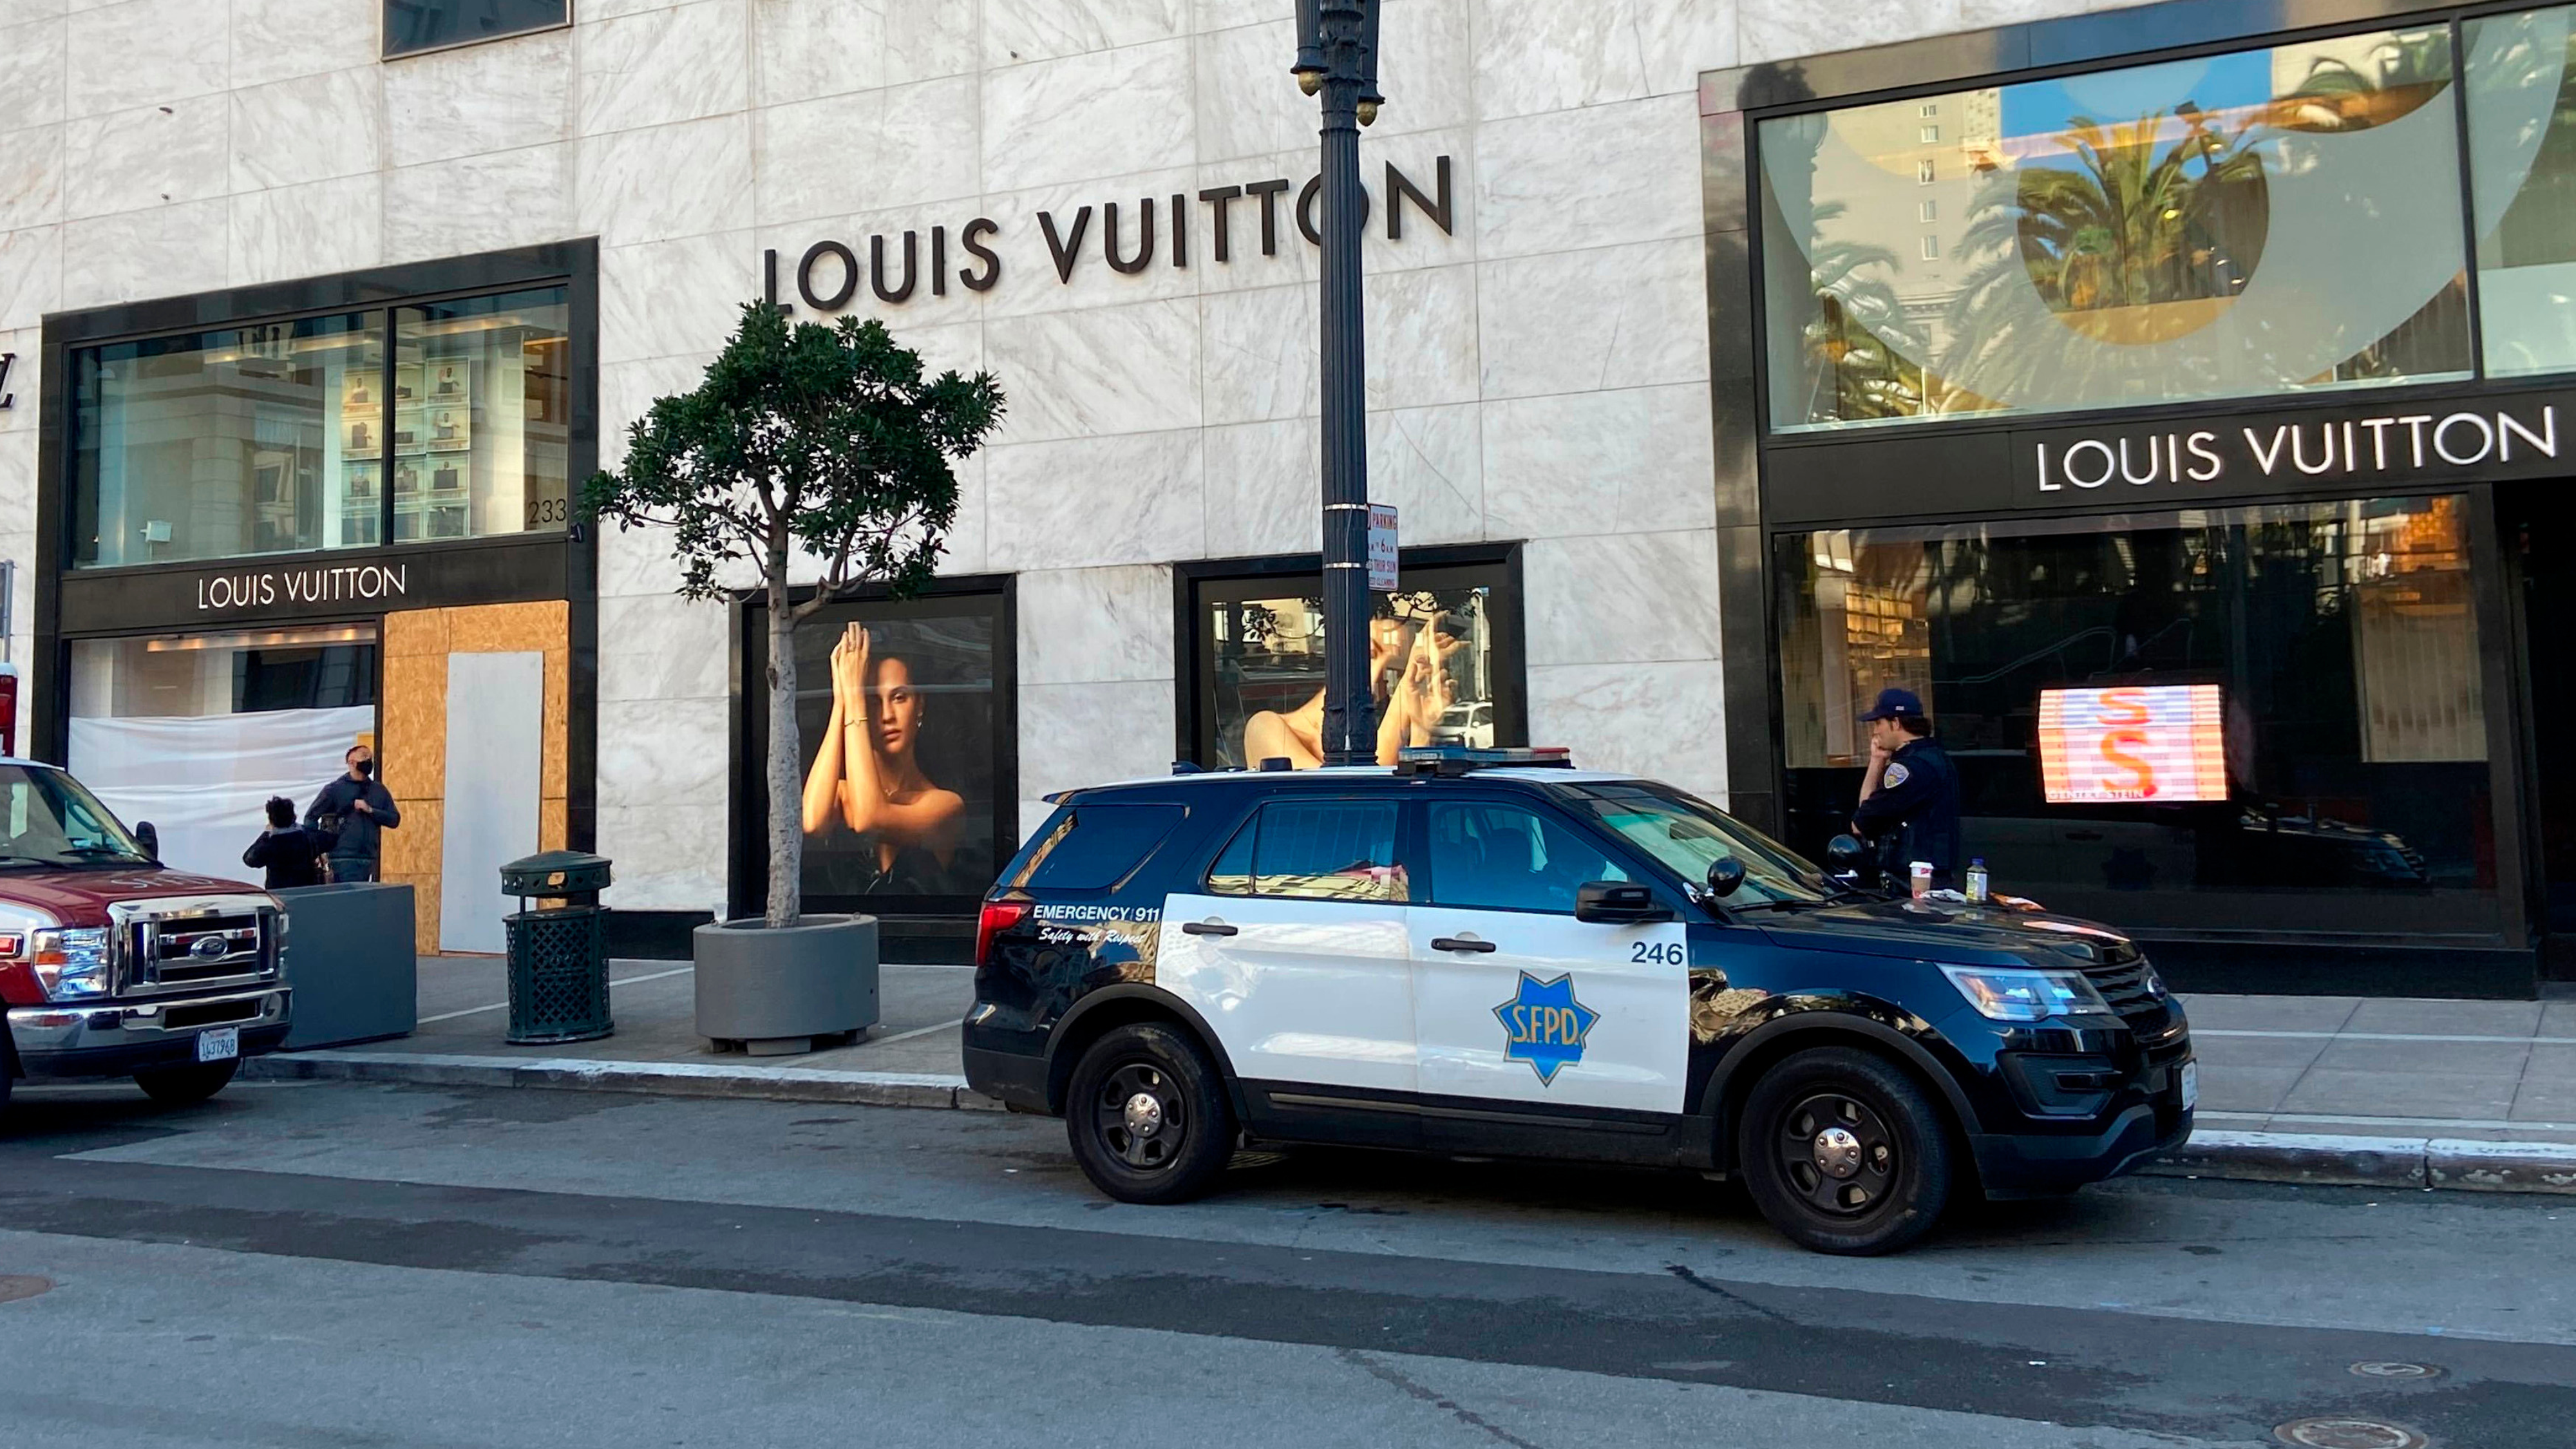 Police officers and emergency crews park outside the Louis Vuitton store in San Francisco's Union Square on Nov. 21, 2021, after looters ransacked businesses.